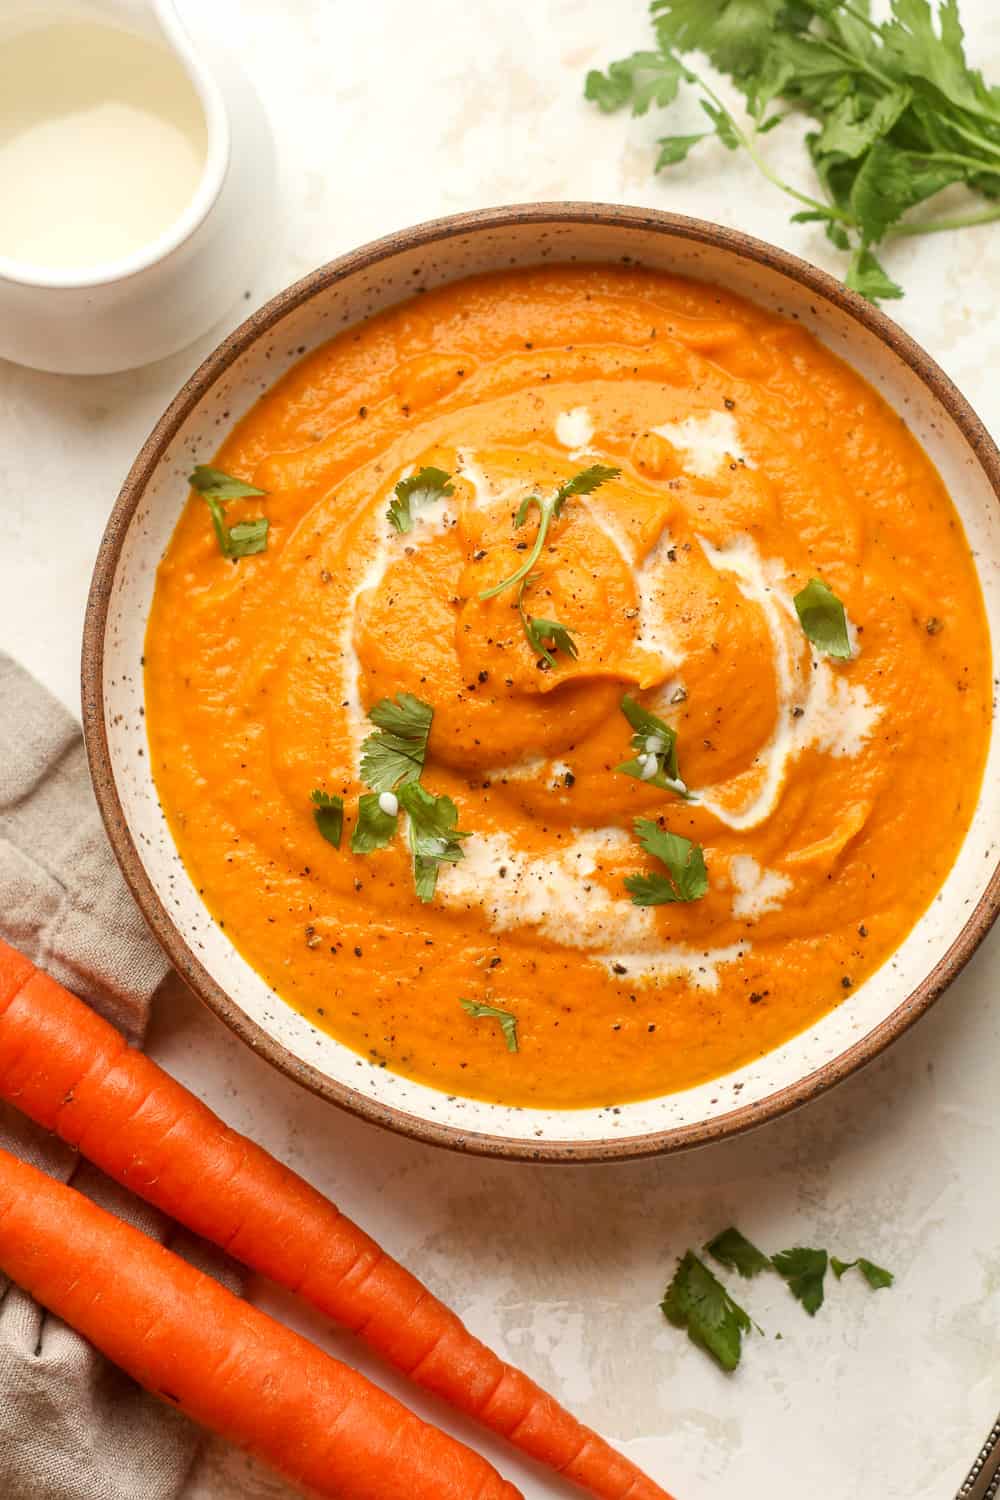 Overhead view of a bowl of carrot soup with cream on top.